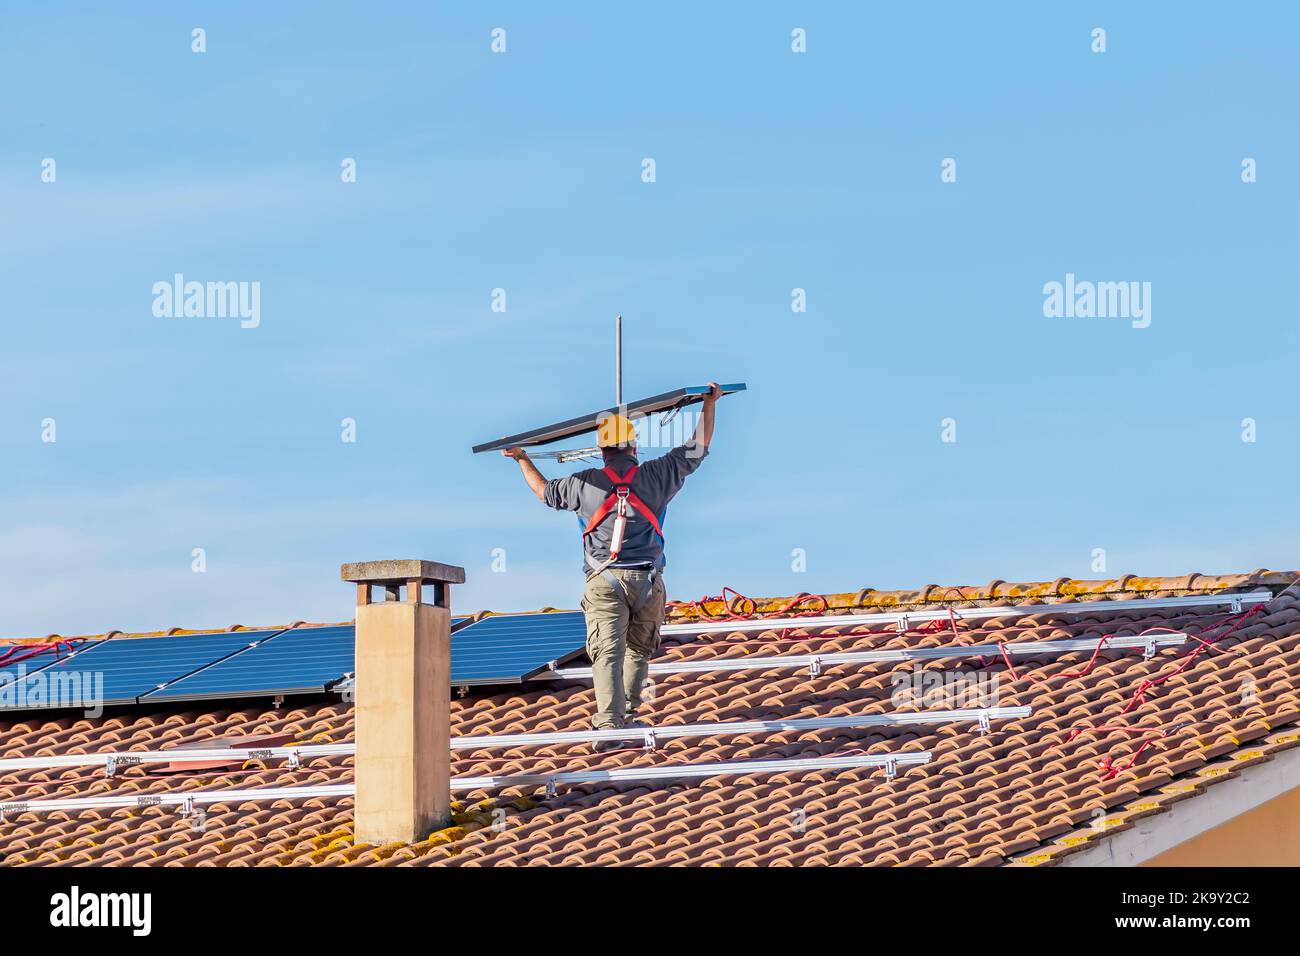 A technician lifts a solar panel over his head as he prepares to mount it on the roof of a red-tiled house Stock Photo